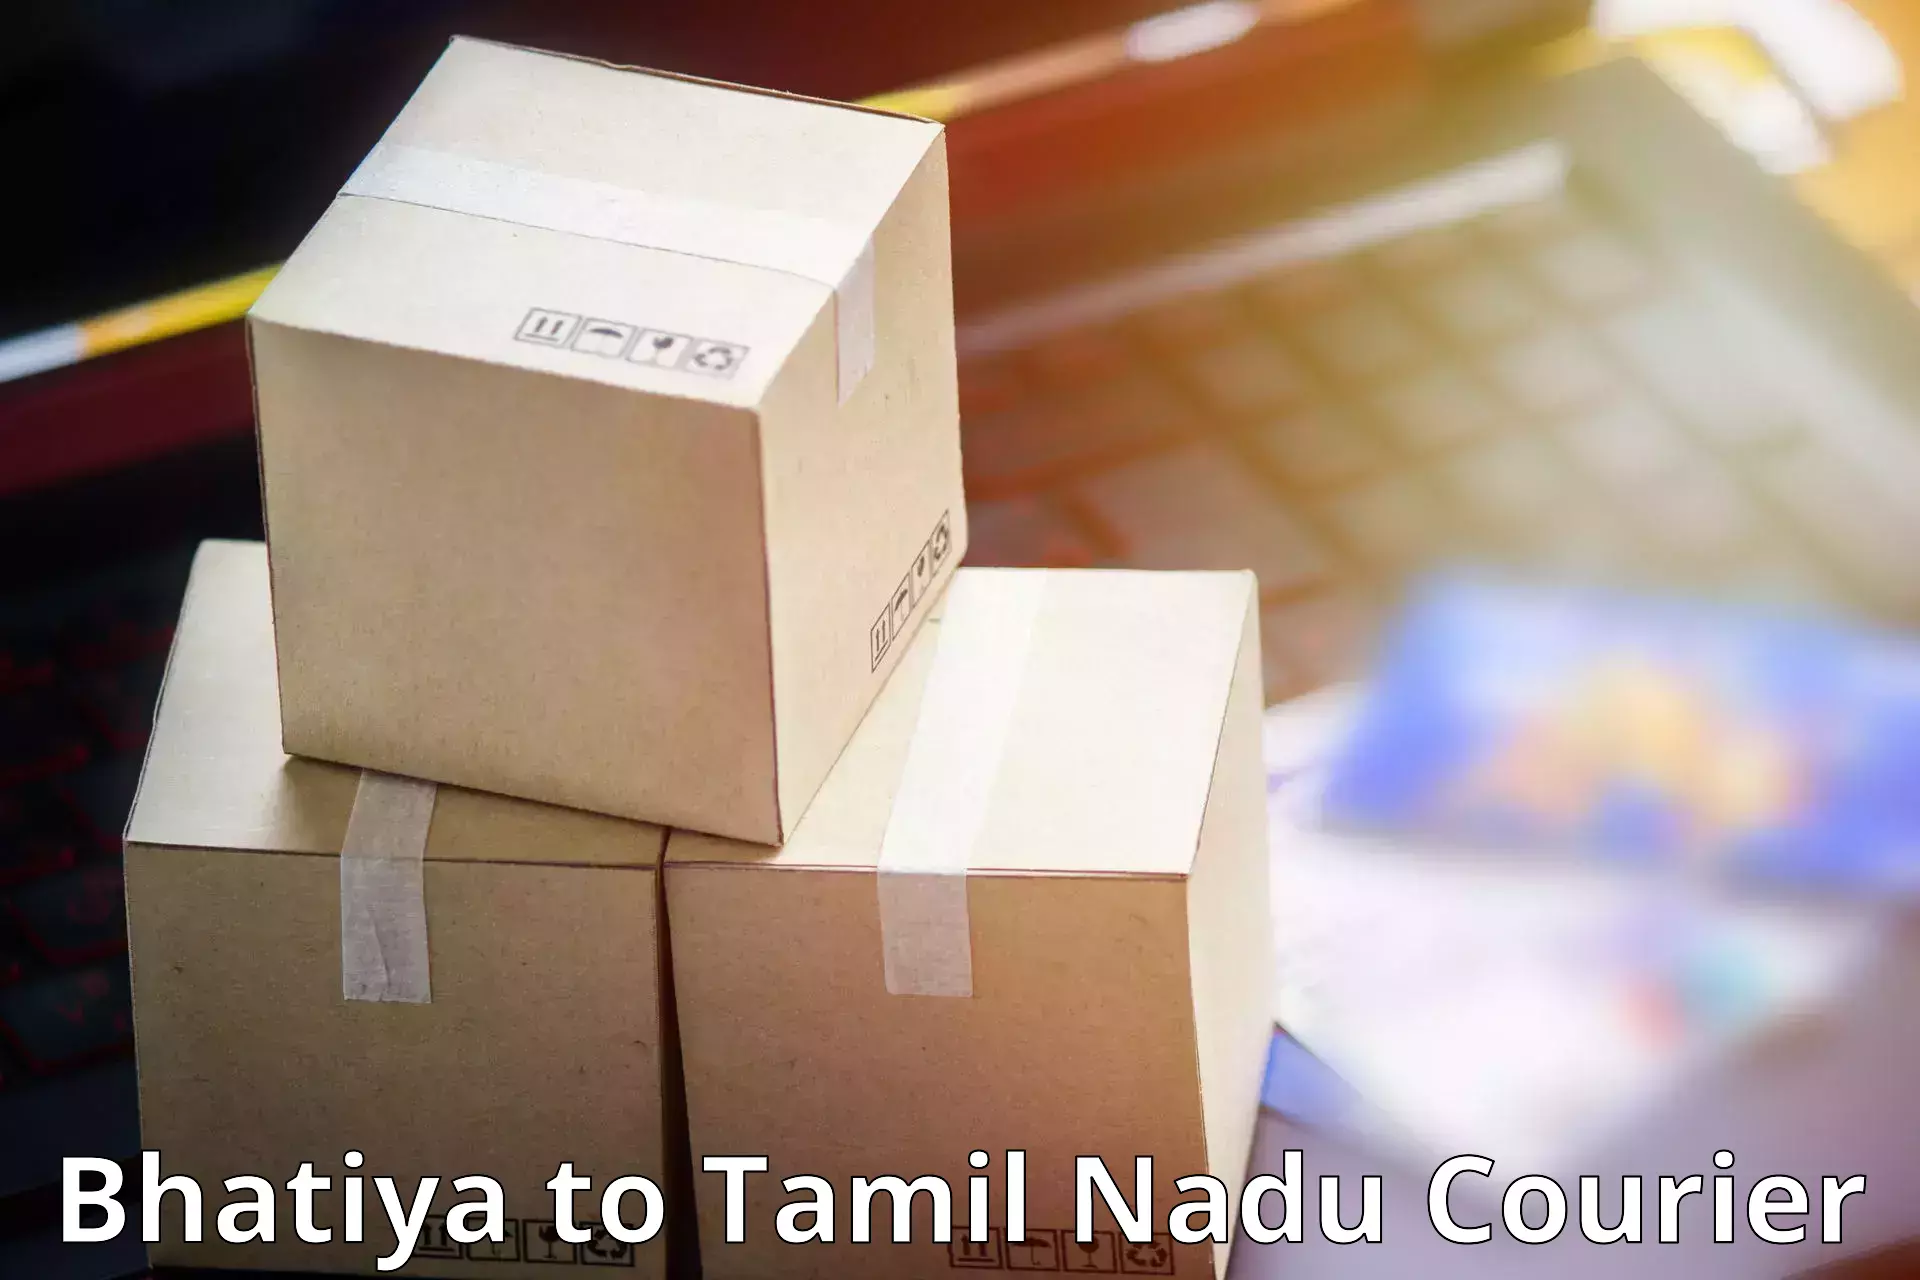 Next-day delivery options Bhatiya to Meenakshi Academy of Higher Education and Research Chennai